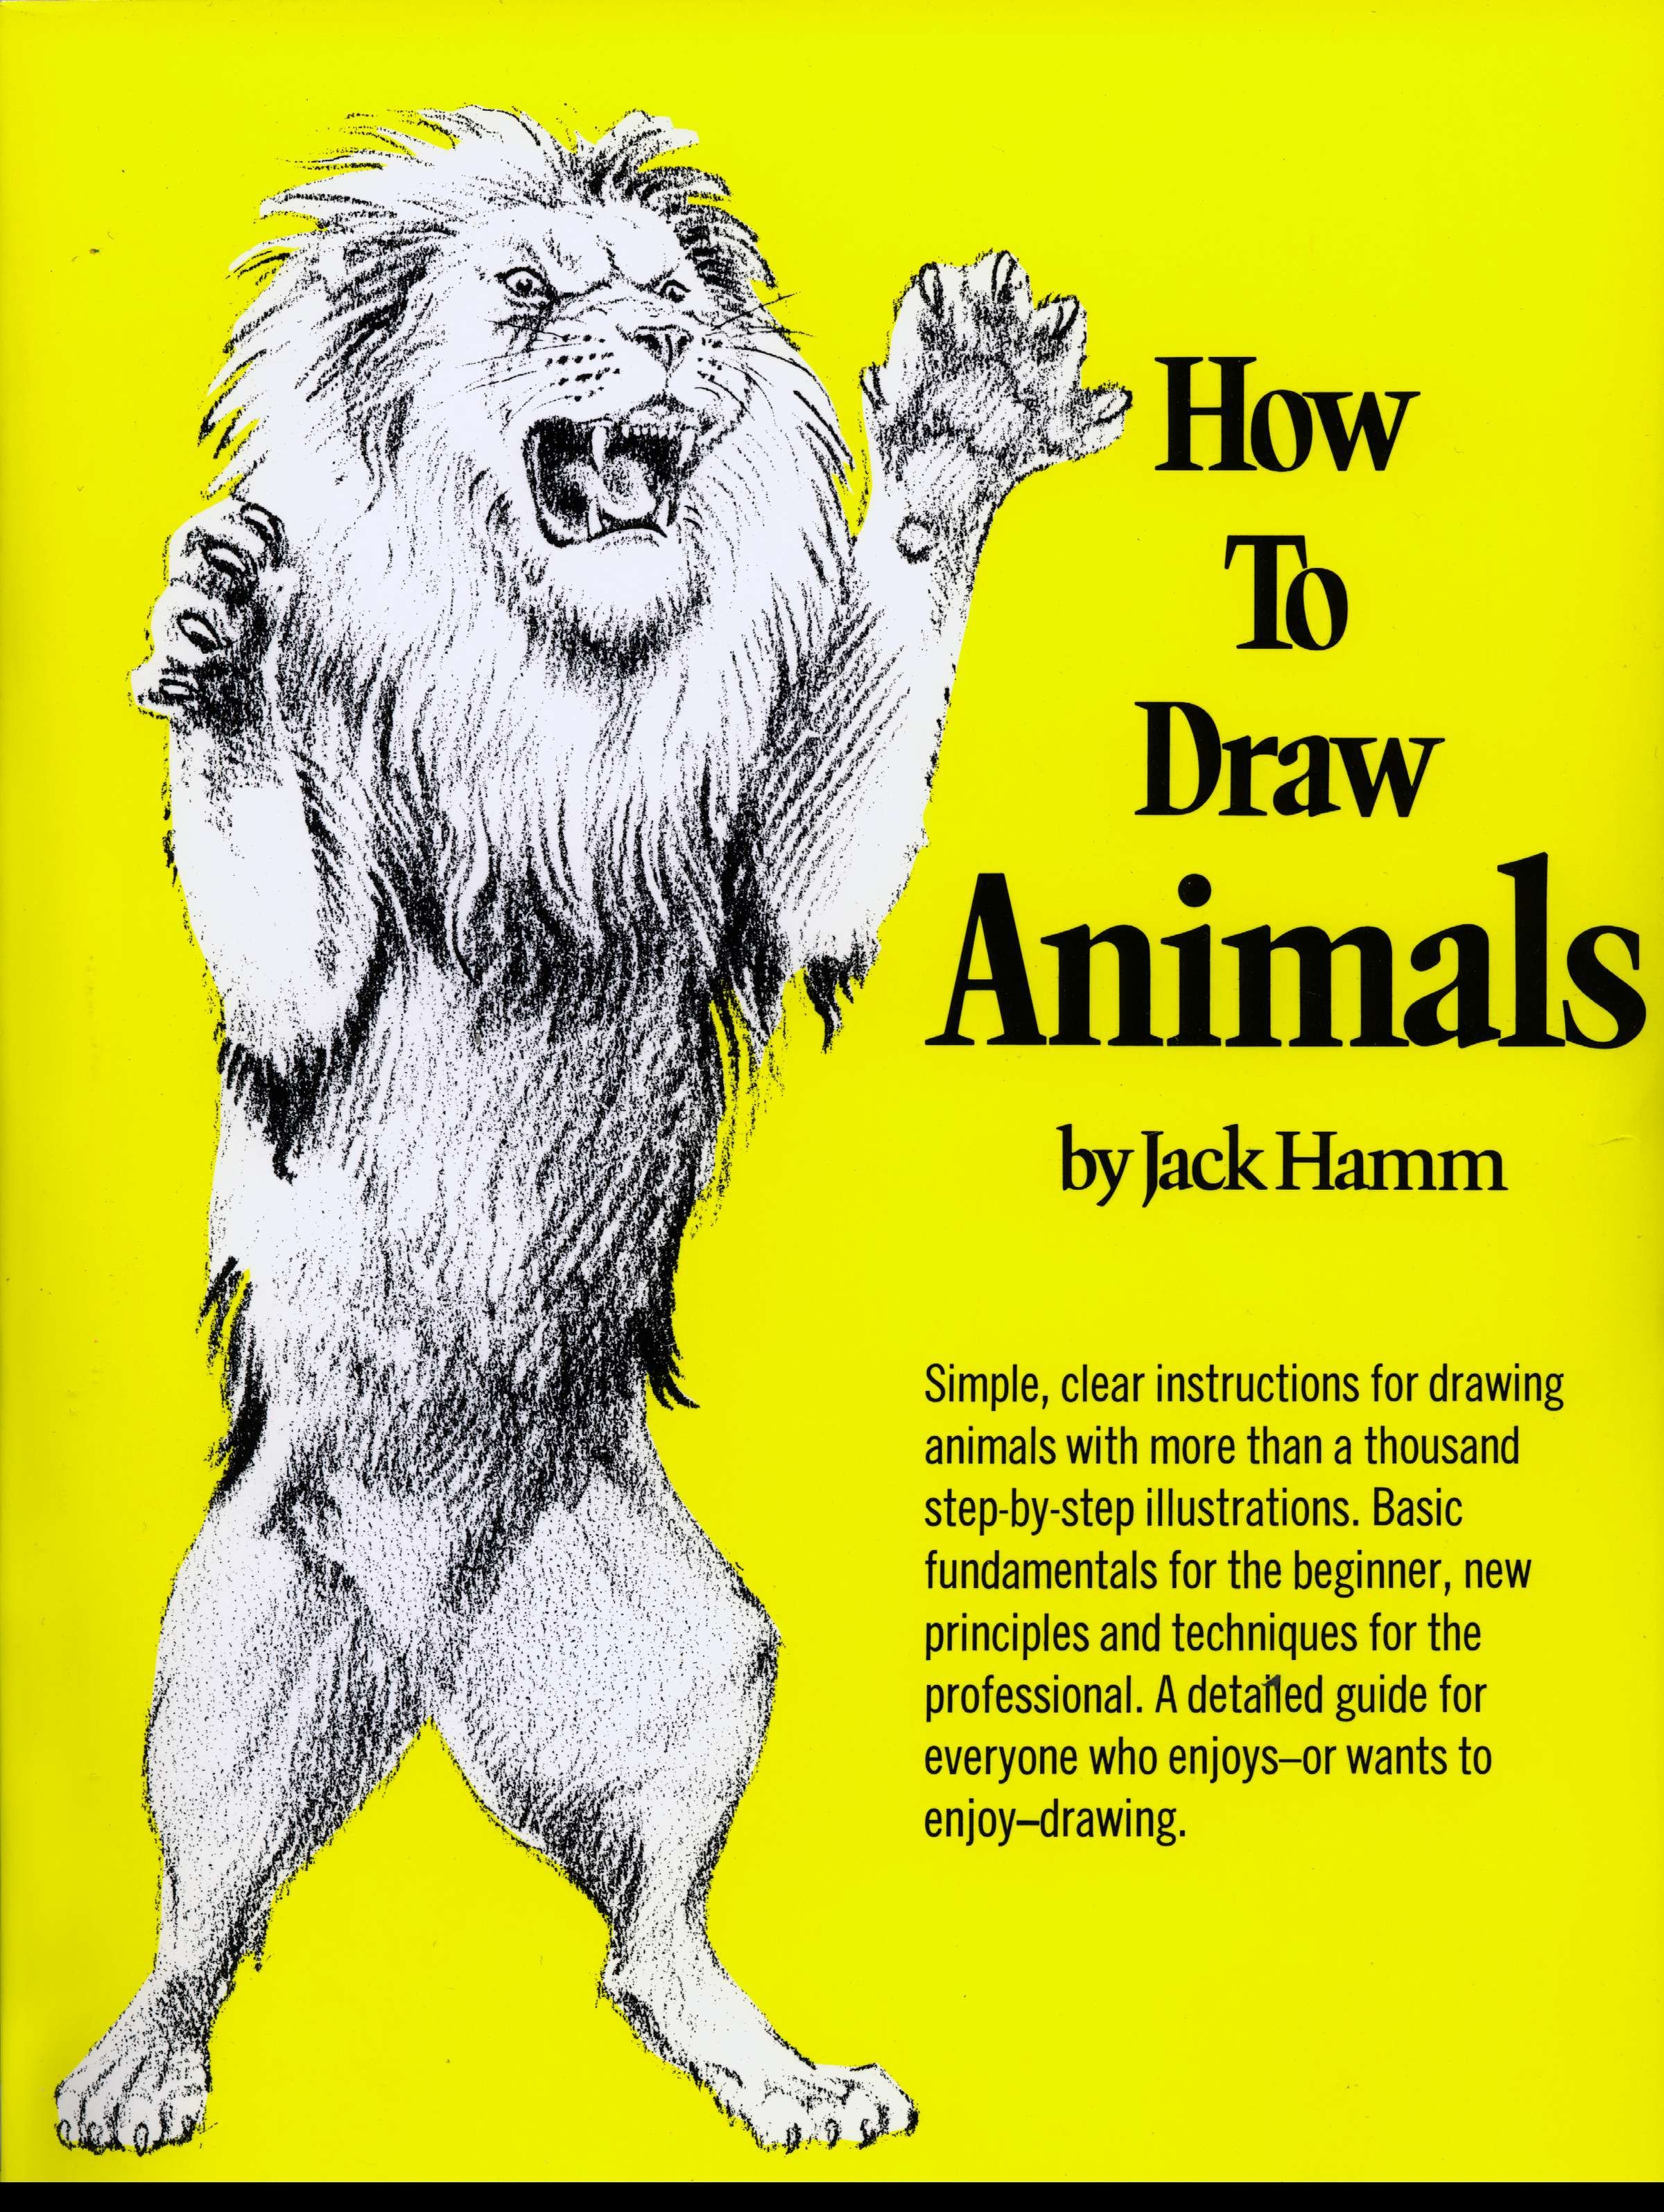 How to Draw Animals by Jack Hamm - Penguin Books New Zealand